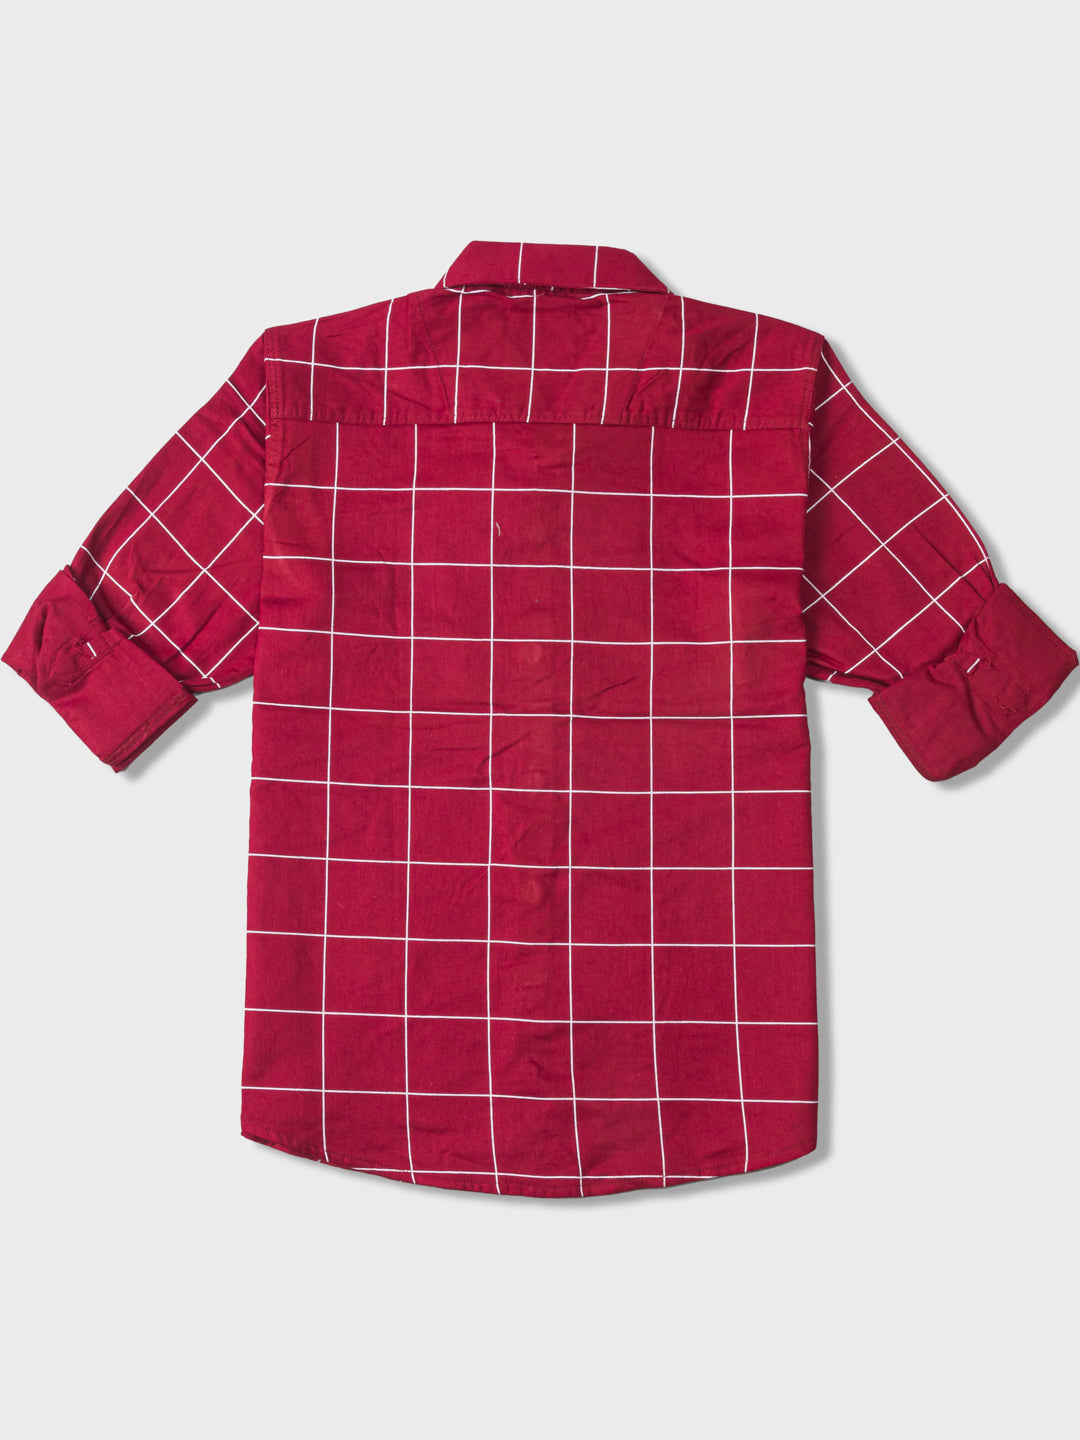 Kid's Scarlet Red Window Checked Shirt